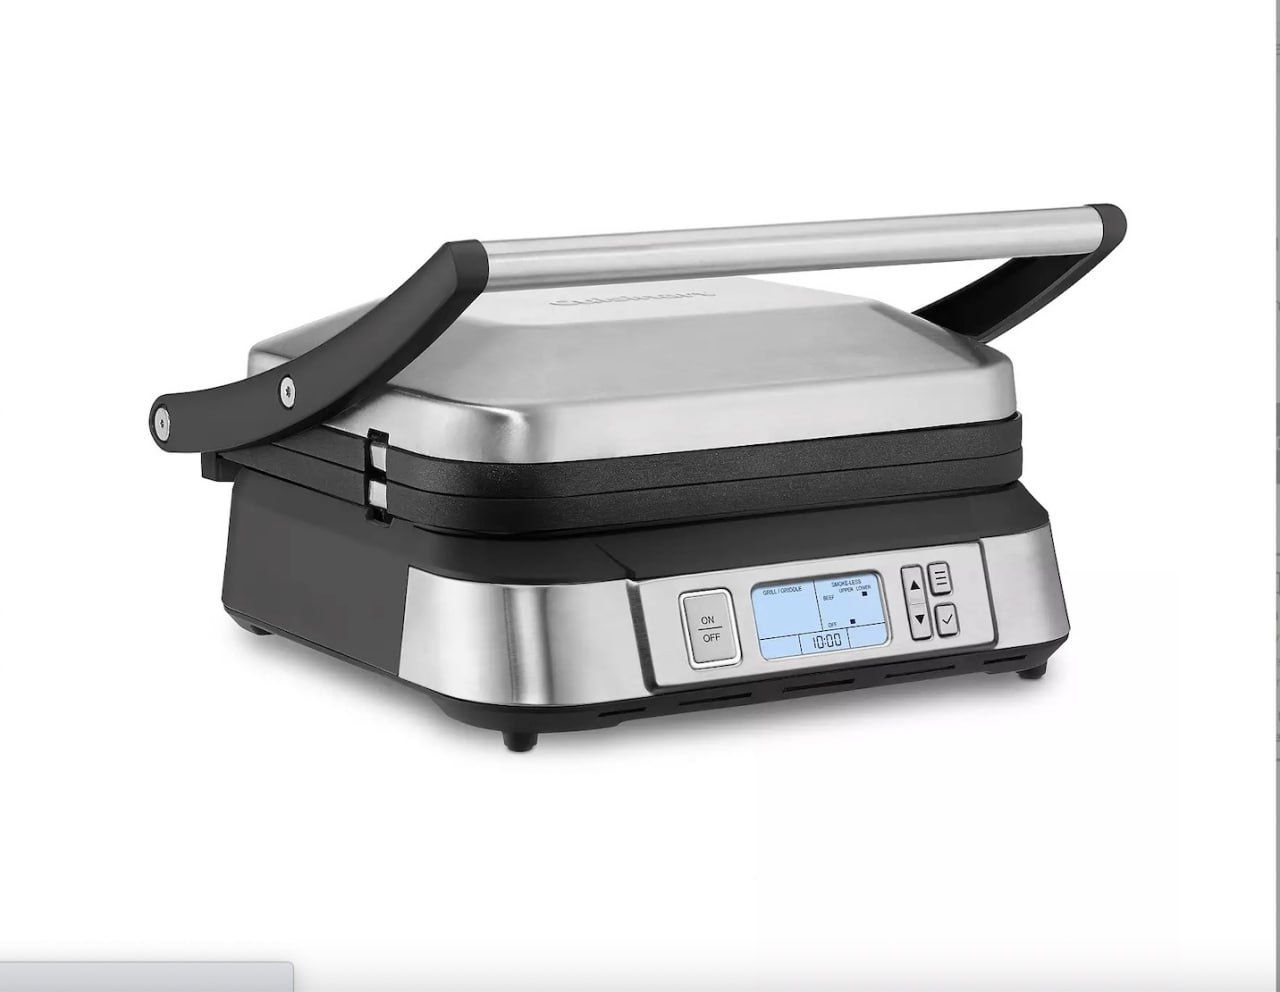 NEW Cuisinart GR-6FR Contact Smoke-Less Mode Griddler - SILVER- Sealed Package